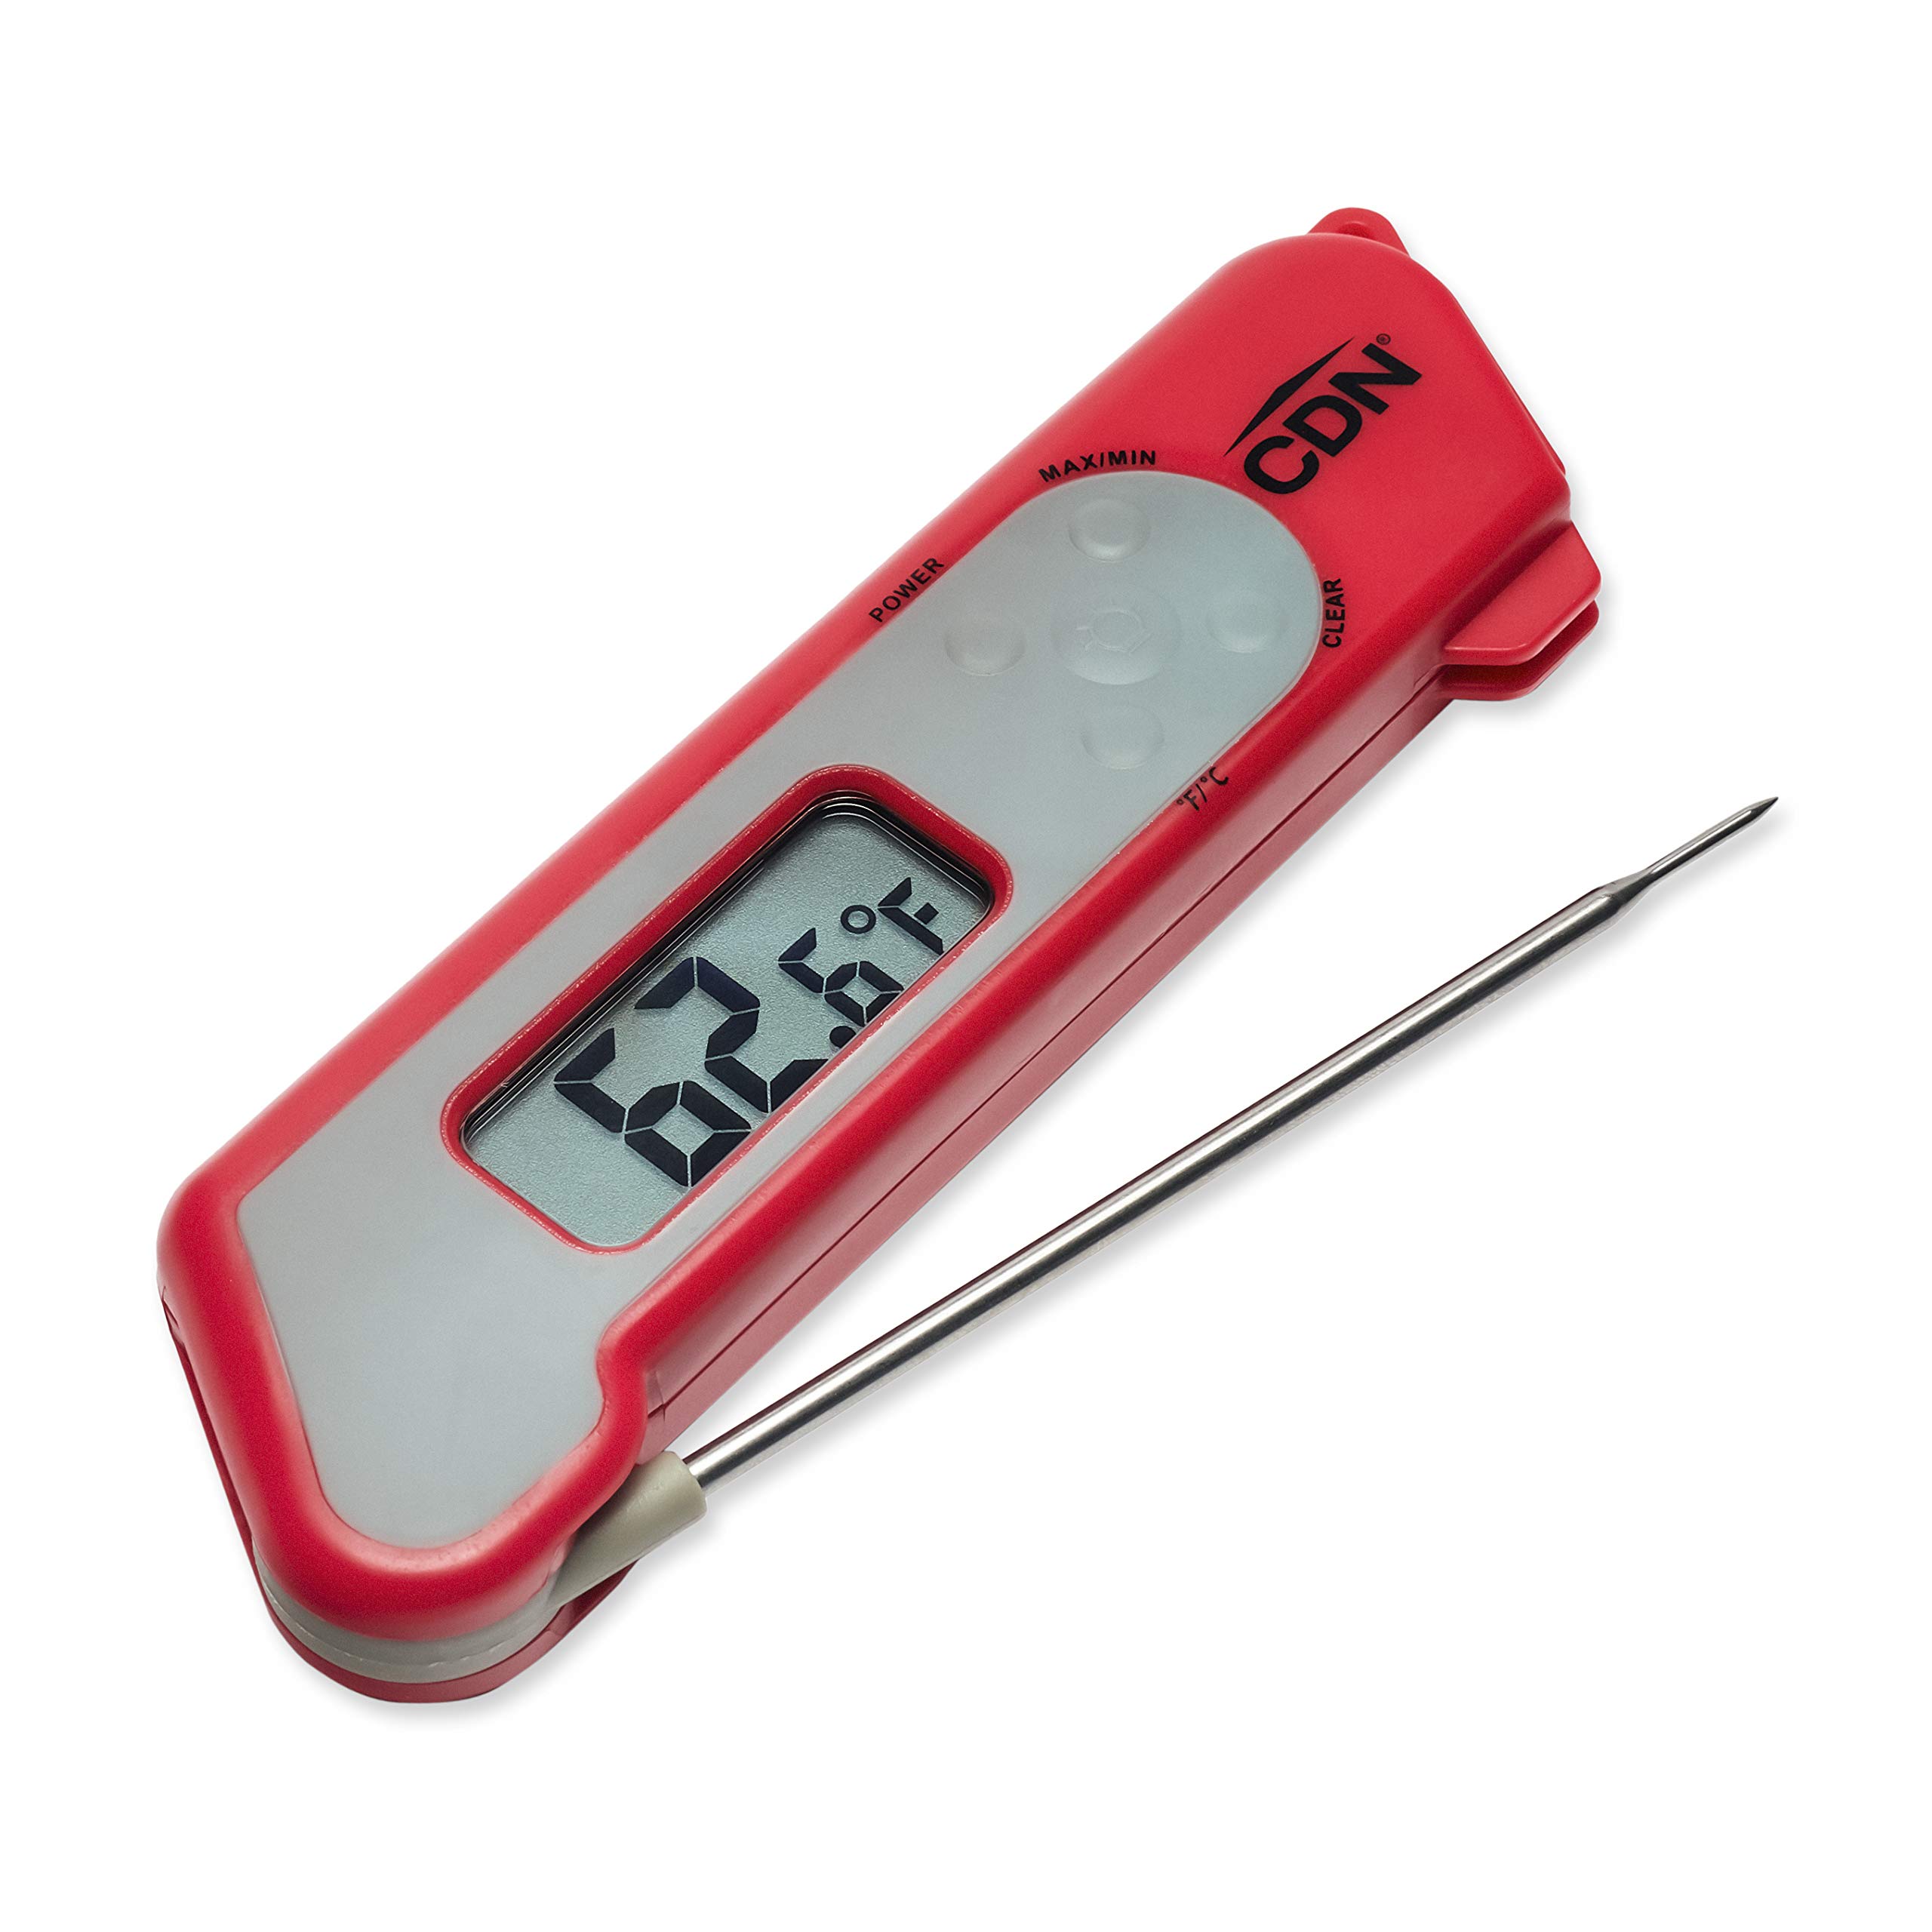 CDN ProAccurate Digital Themometer - Folding Thermocouple Thermometer - Instant Read - Stainless Steel Tip - Red (TCT572-R)